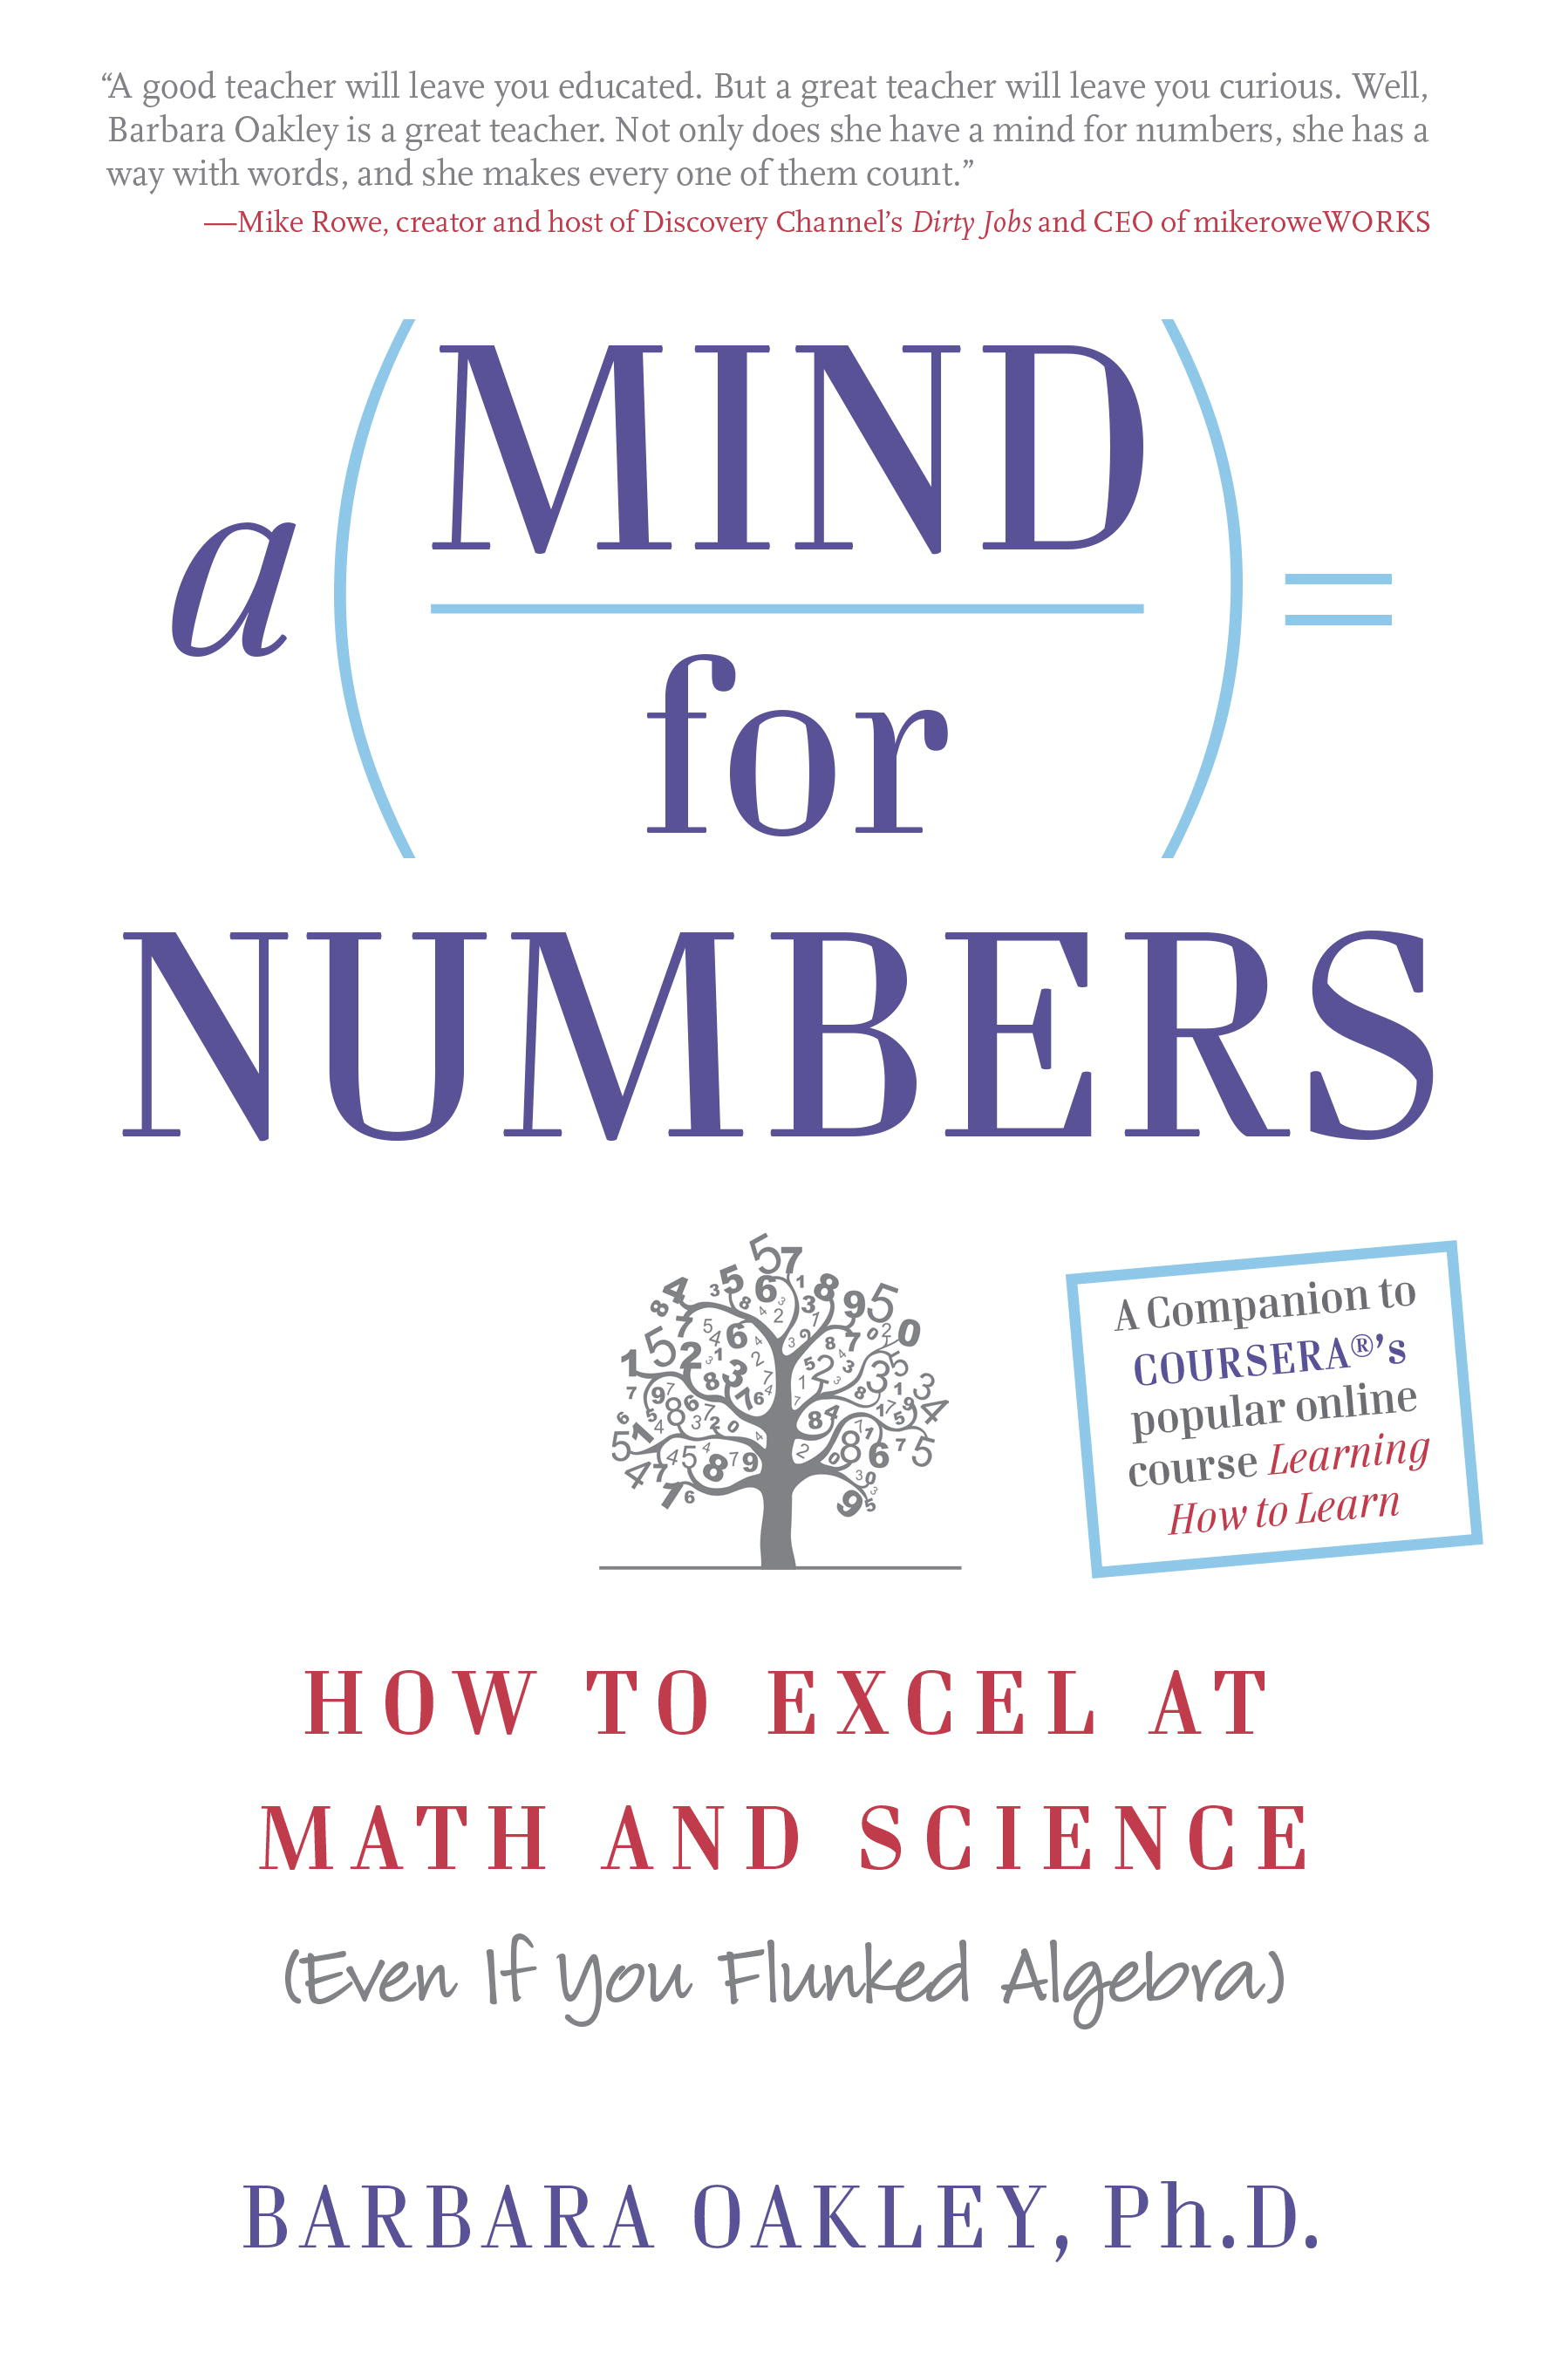 A Mind for Numbers: How to Excel at Math and Science (Even If You Flunked Algebra) in Kindle/PDF/EPUB